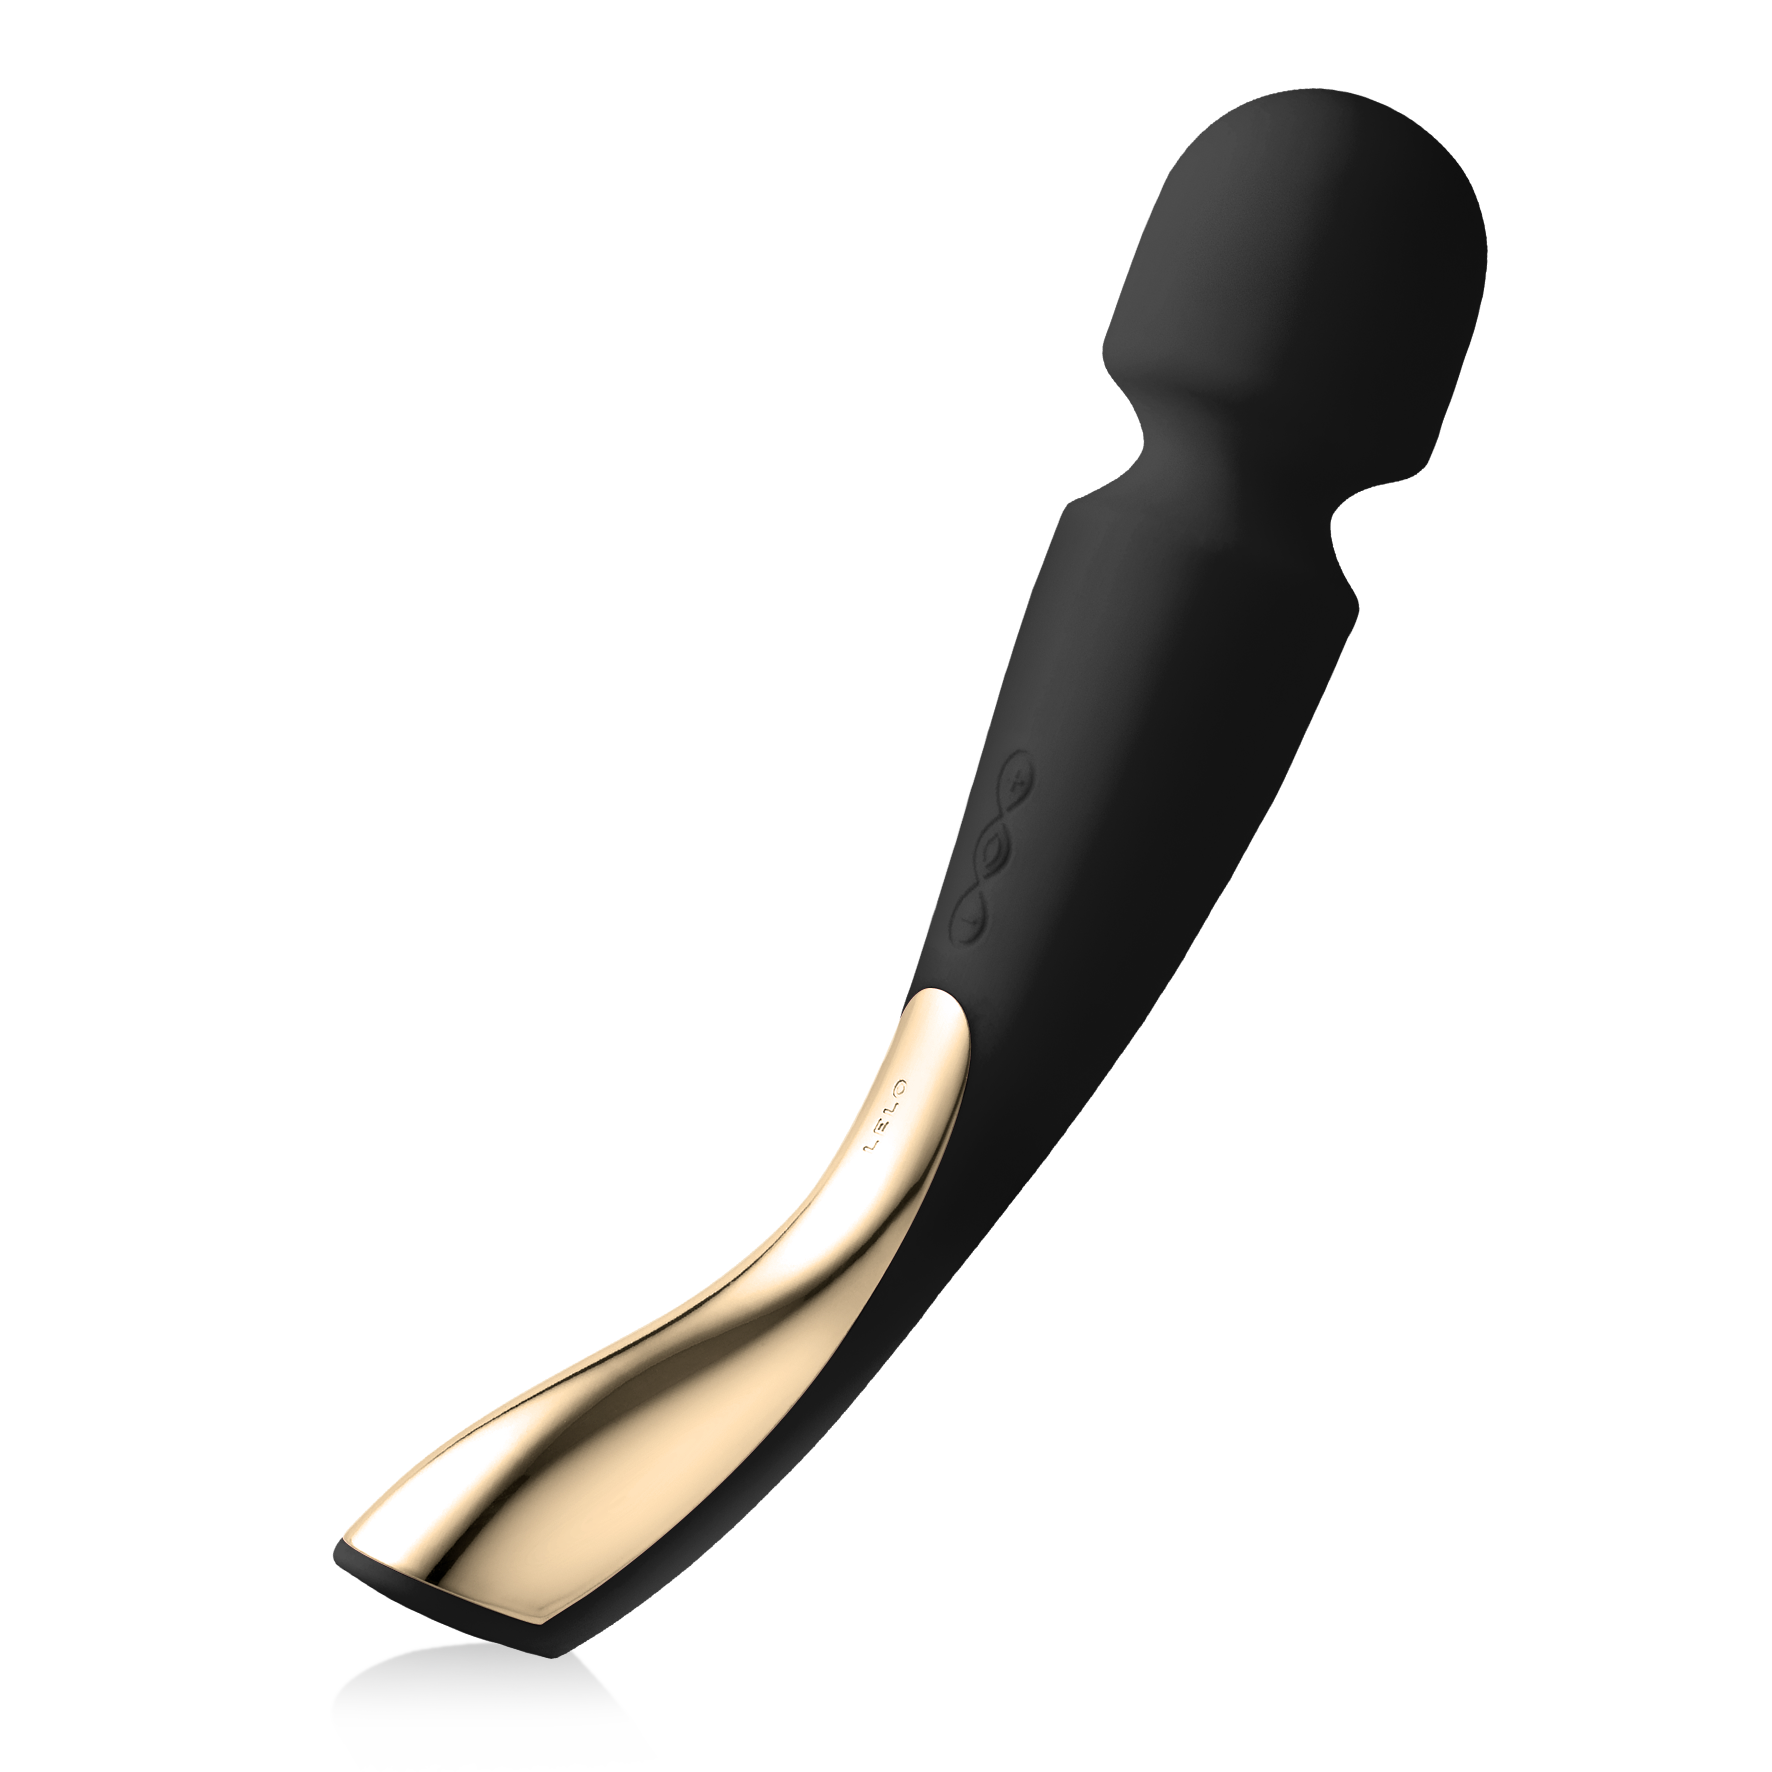 Lelo Smart Wand 2 Massager - Large - Thorn & Feather Sex Toy Canada